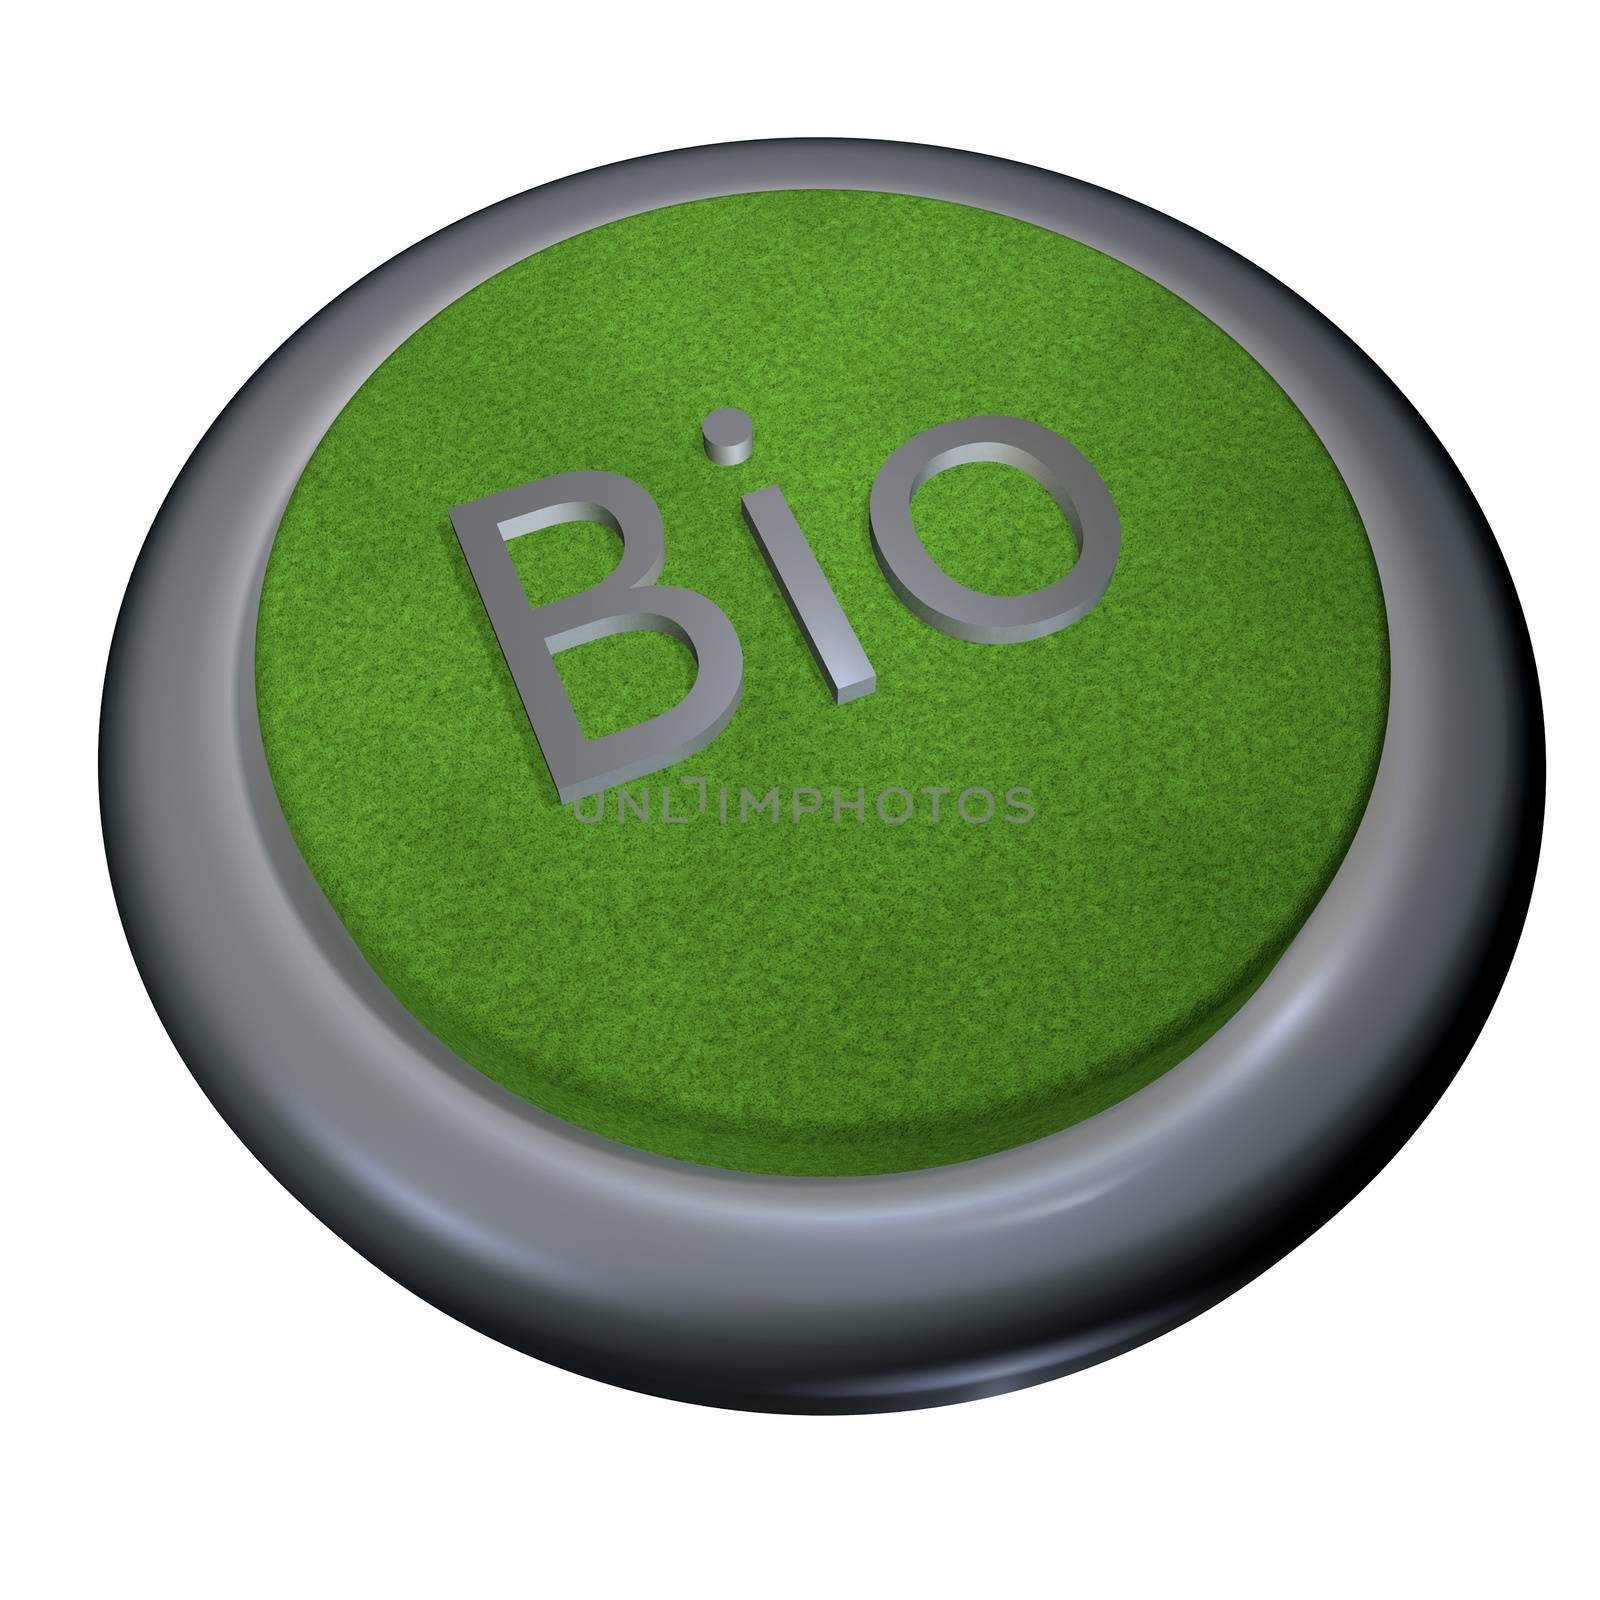 Bio button isolated over white, 3d render